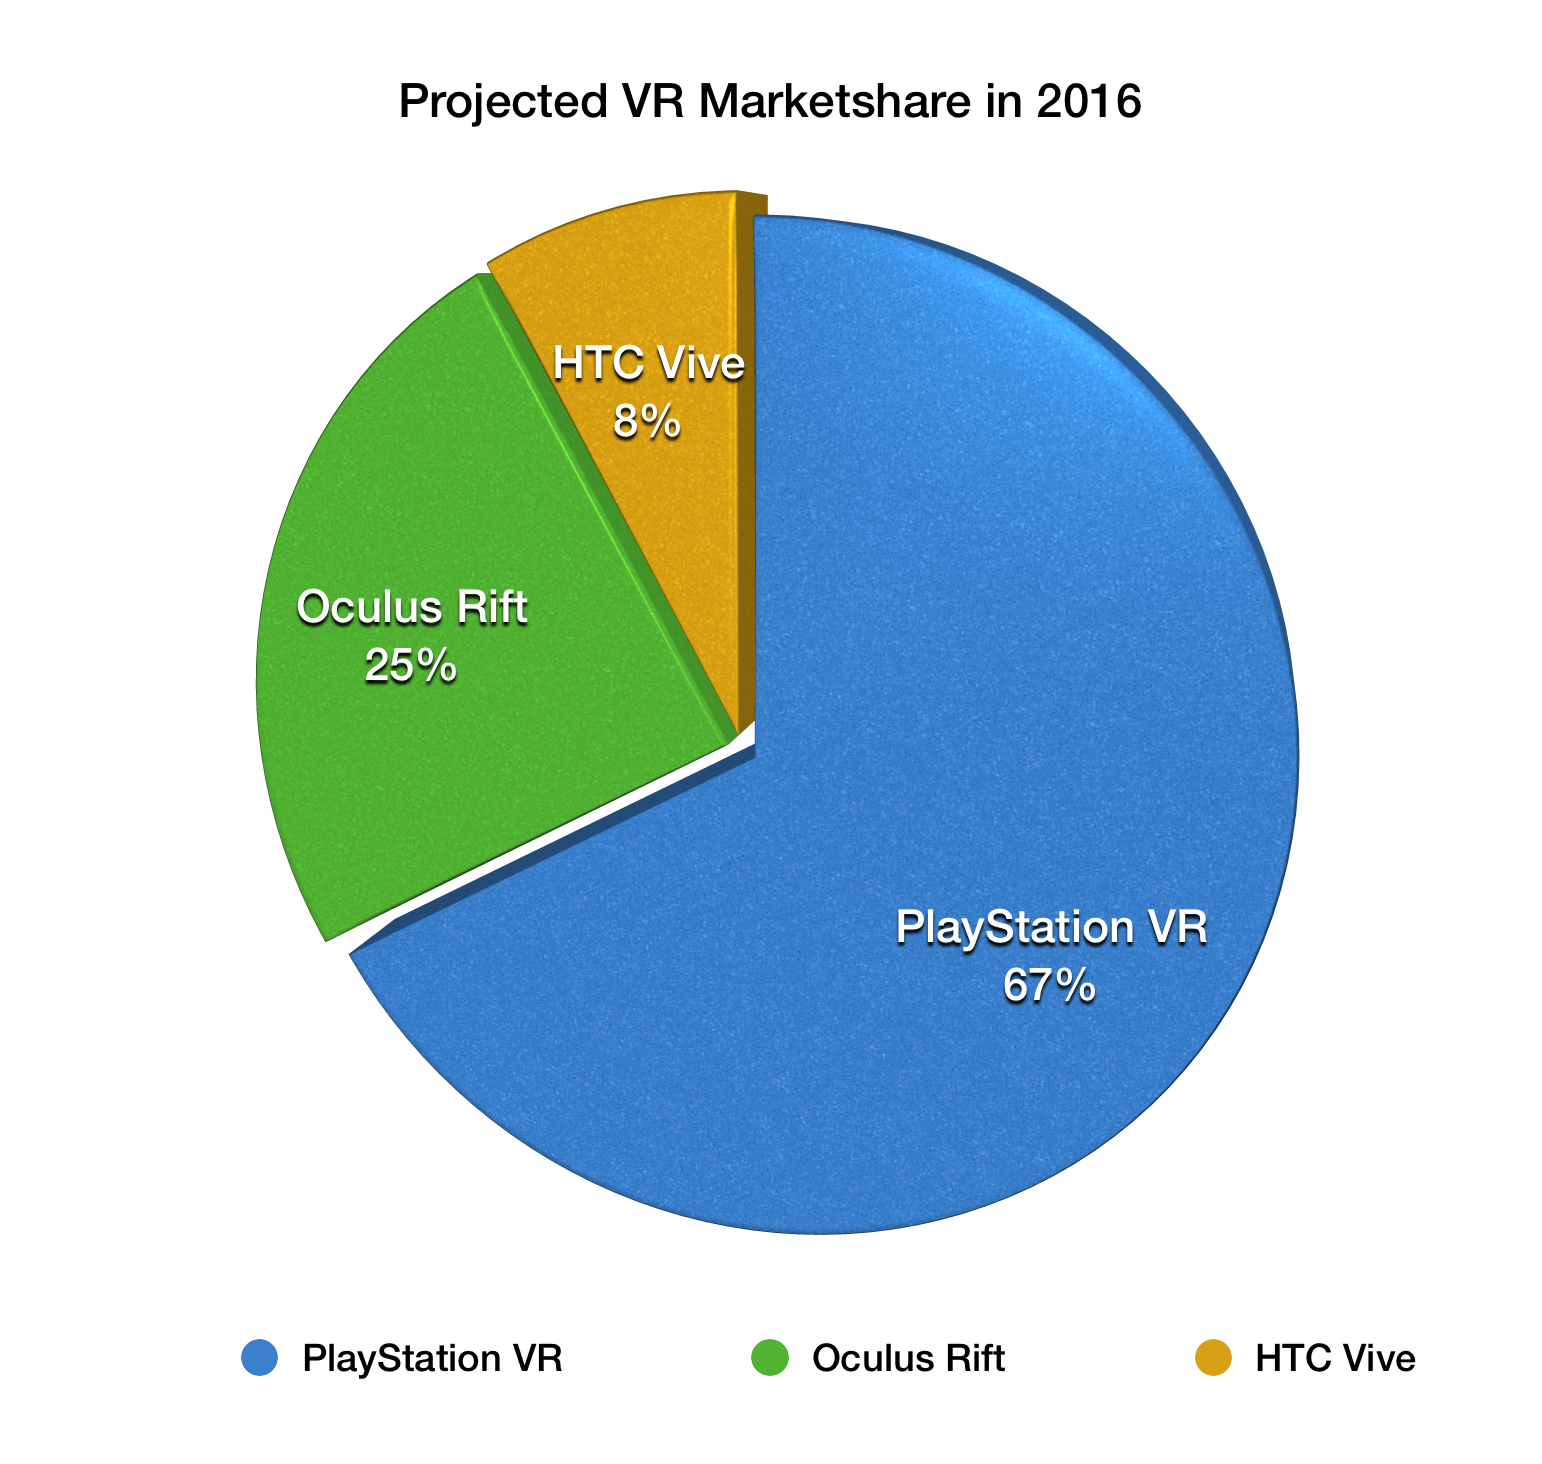 PlayStation VR projected to take 67 marketshare this year